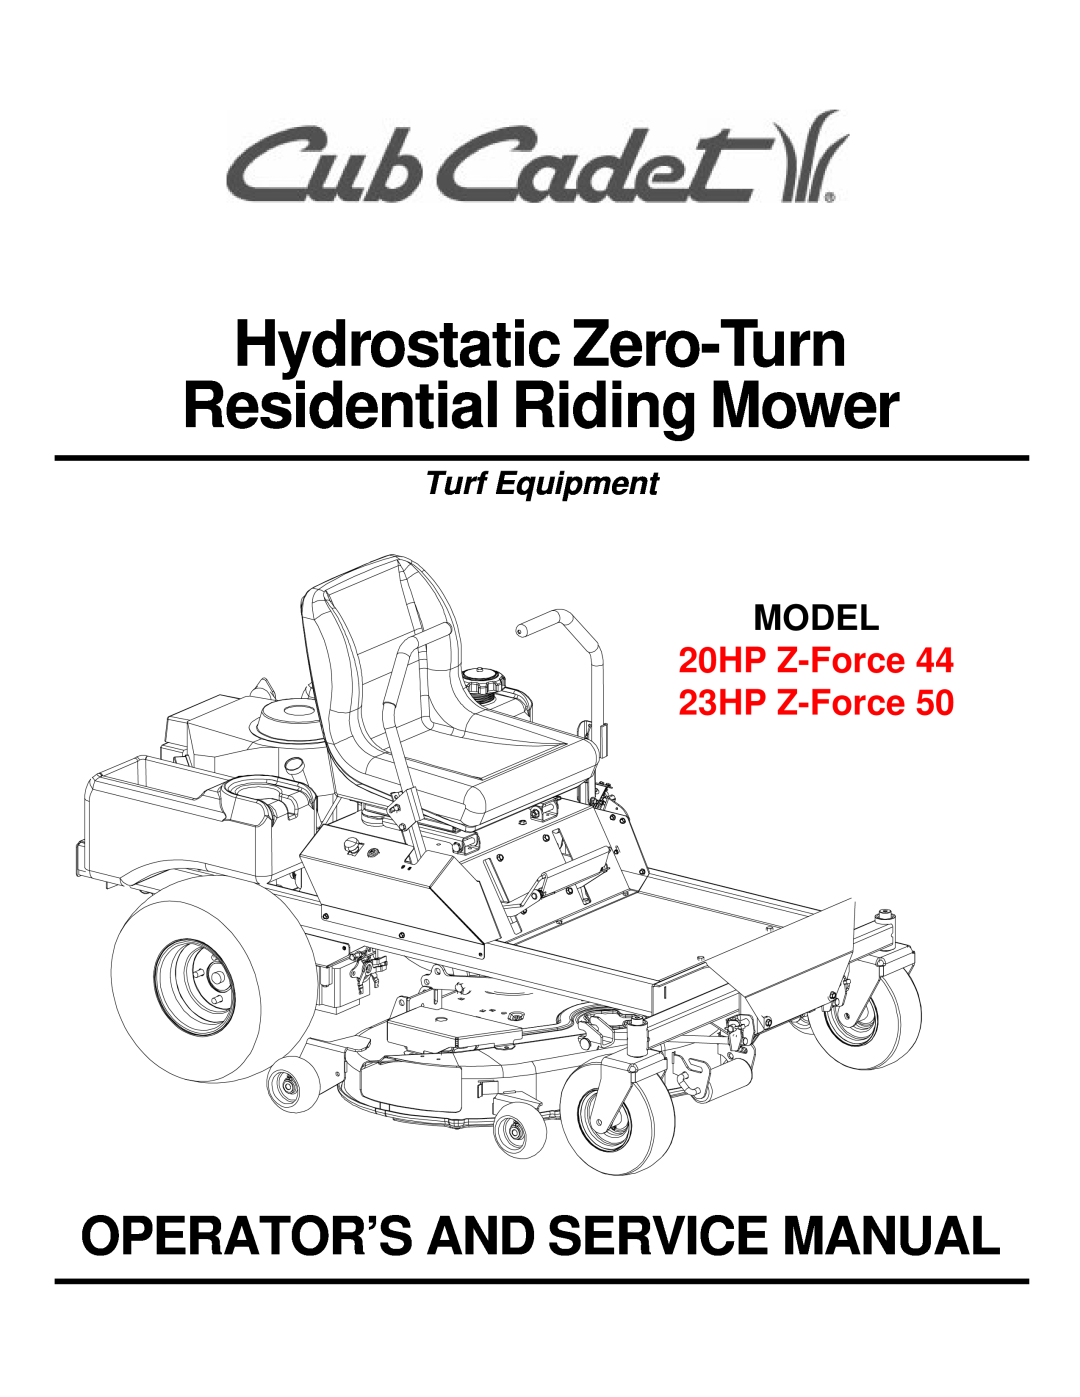 Cub Cadet 23HP Z-Force 50 service manual Hydrostatic Zero-Turn Residential Riding Mower, Operator’S And Service Manual 